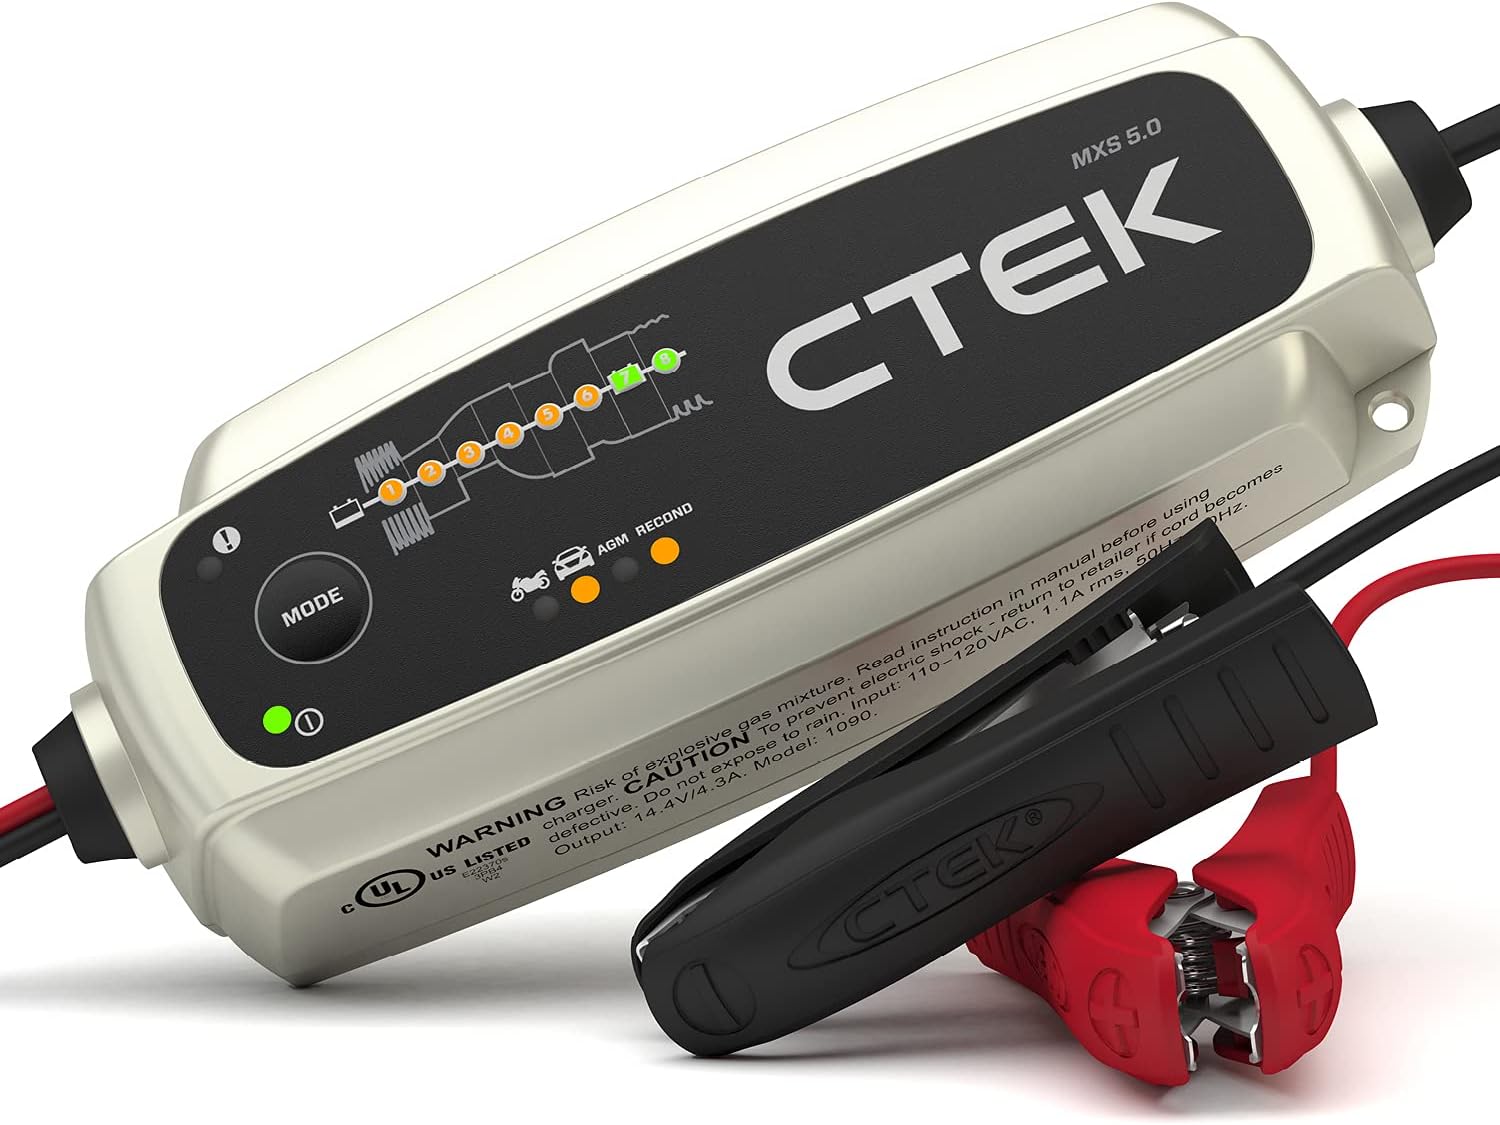 CTEK - 40-206 MXS 5.0 Fully Automatic 4.3 amp Battery Charger and Maintainer 12V - CTEK - 40-206 MXS 5.0 Battery Charger Review